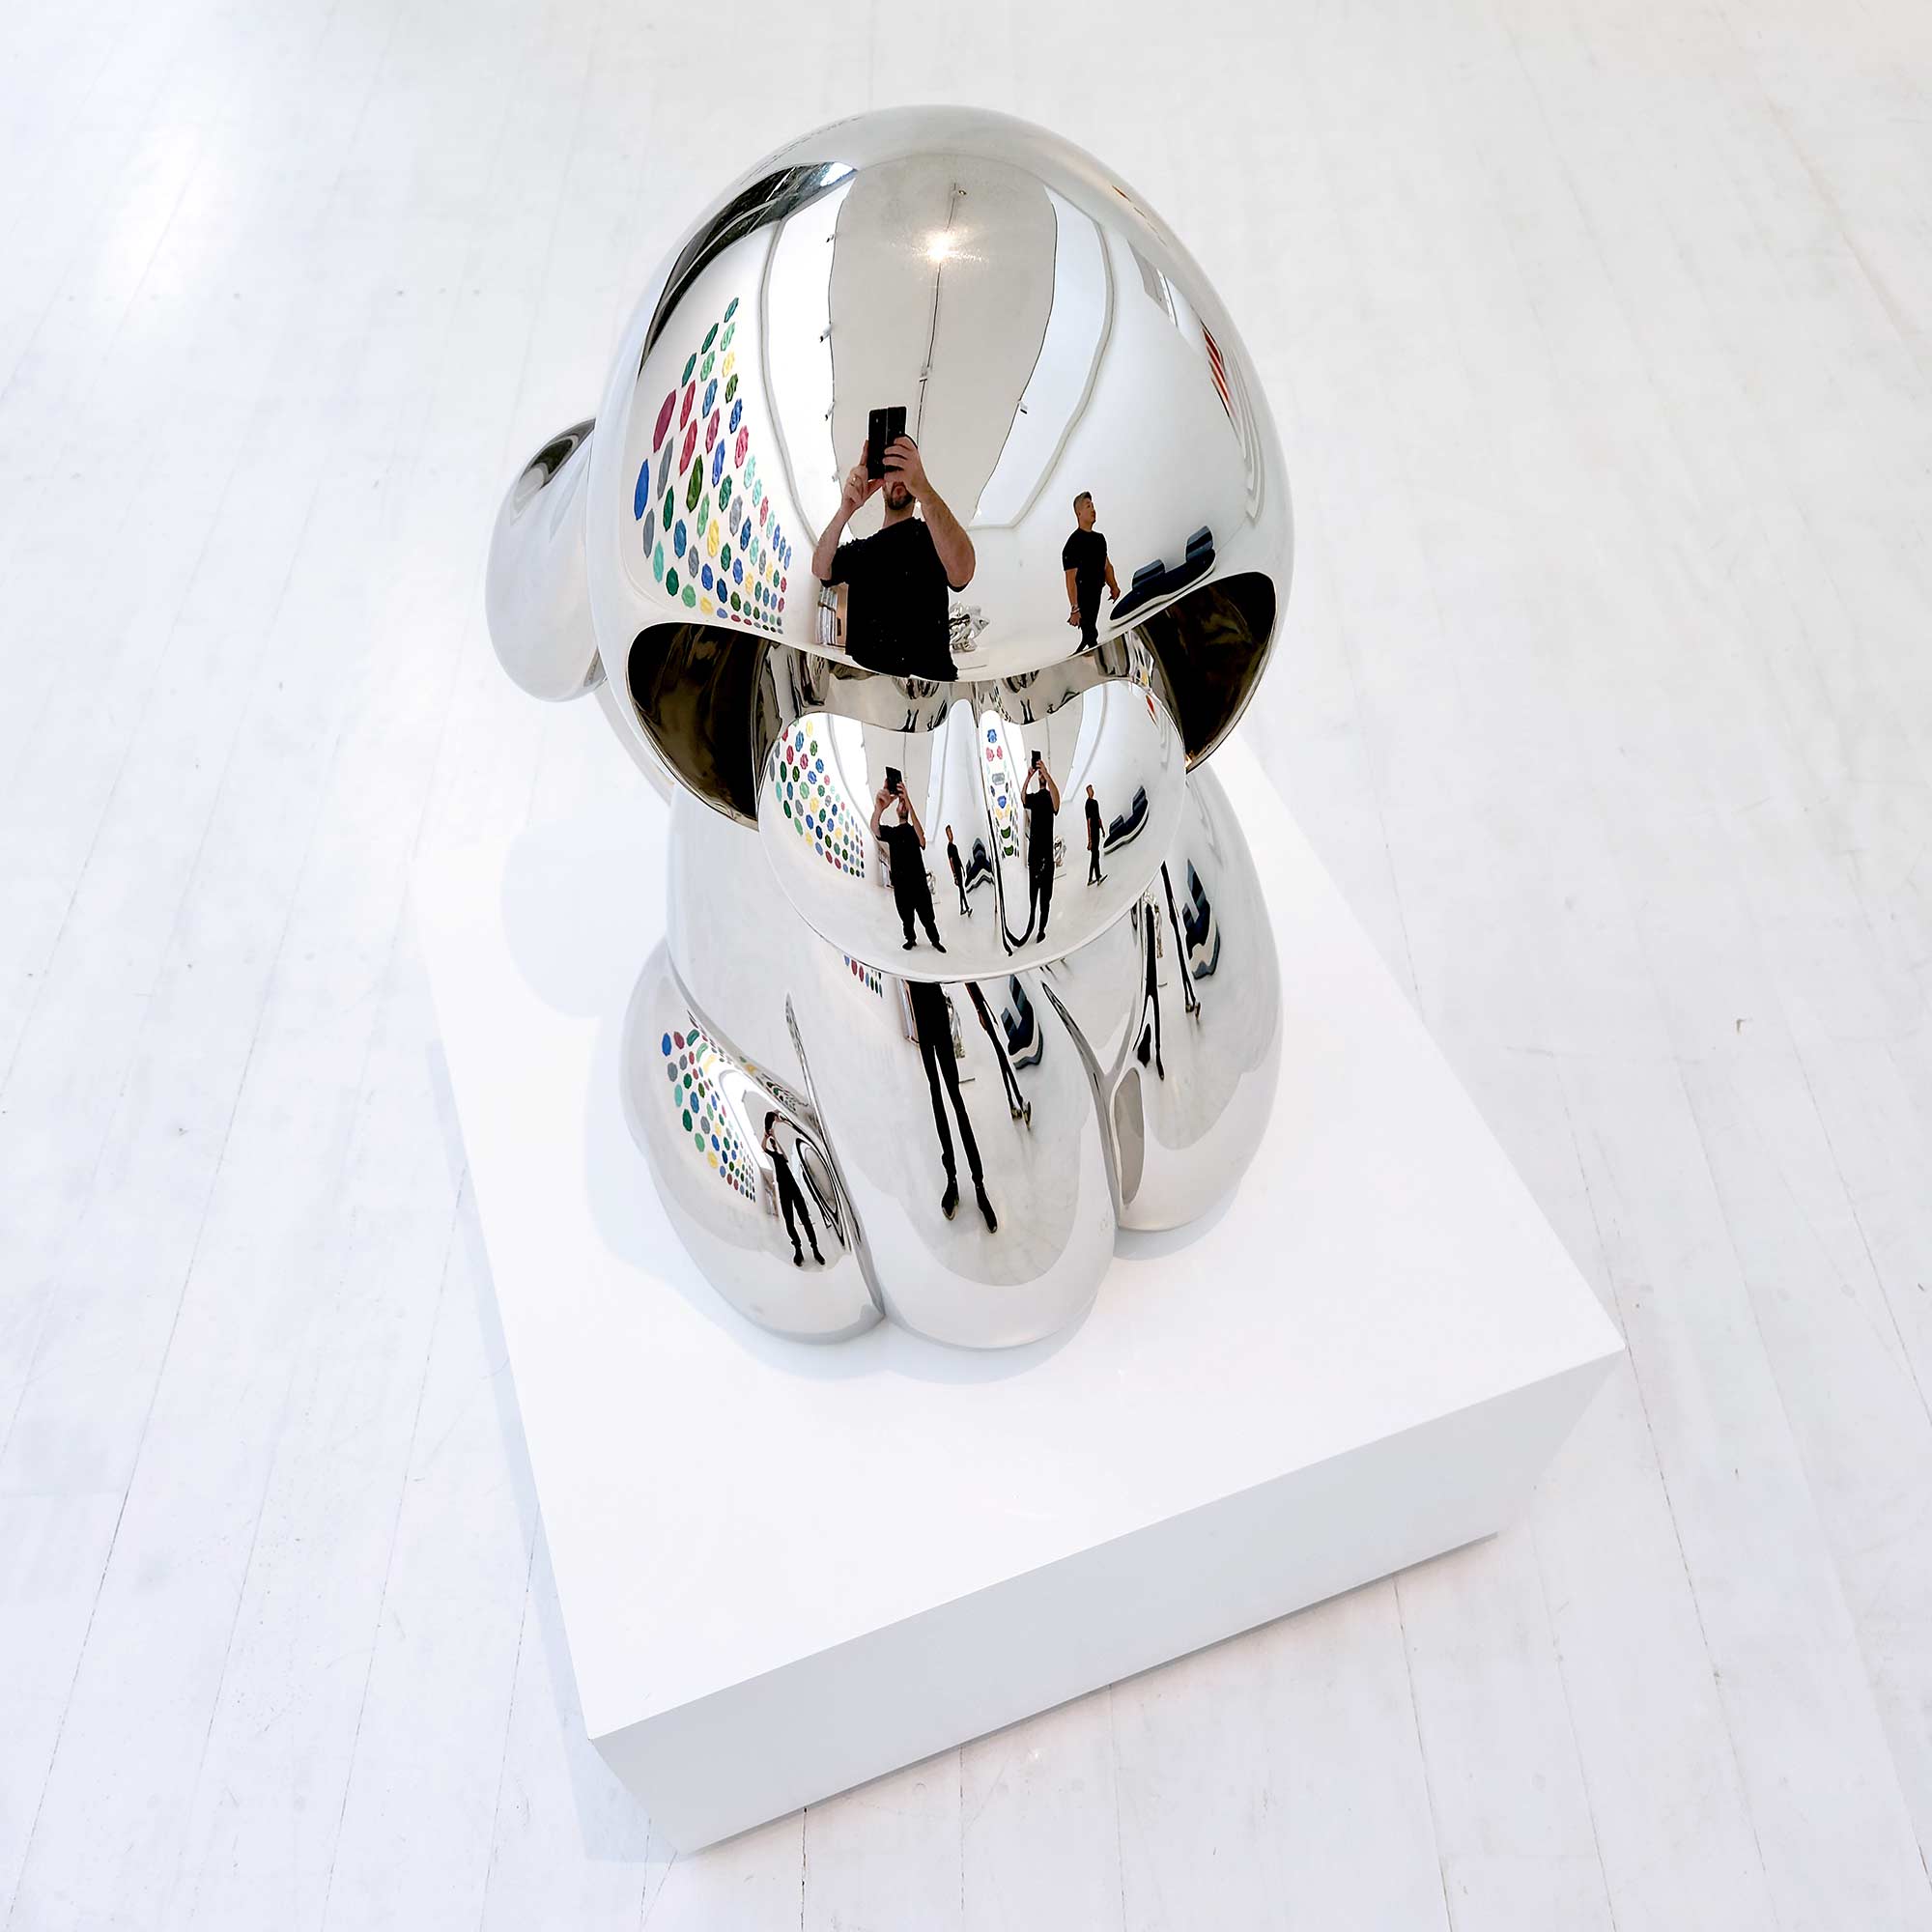 Dog Roar, Polished Stainless steel sculpture, 80 cm high by Ferdi B Dick, top view